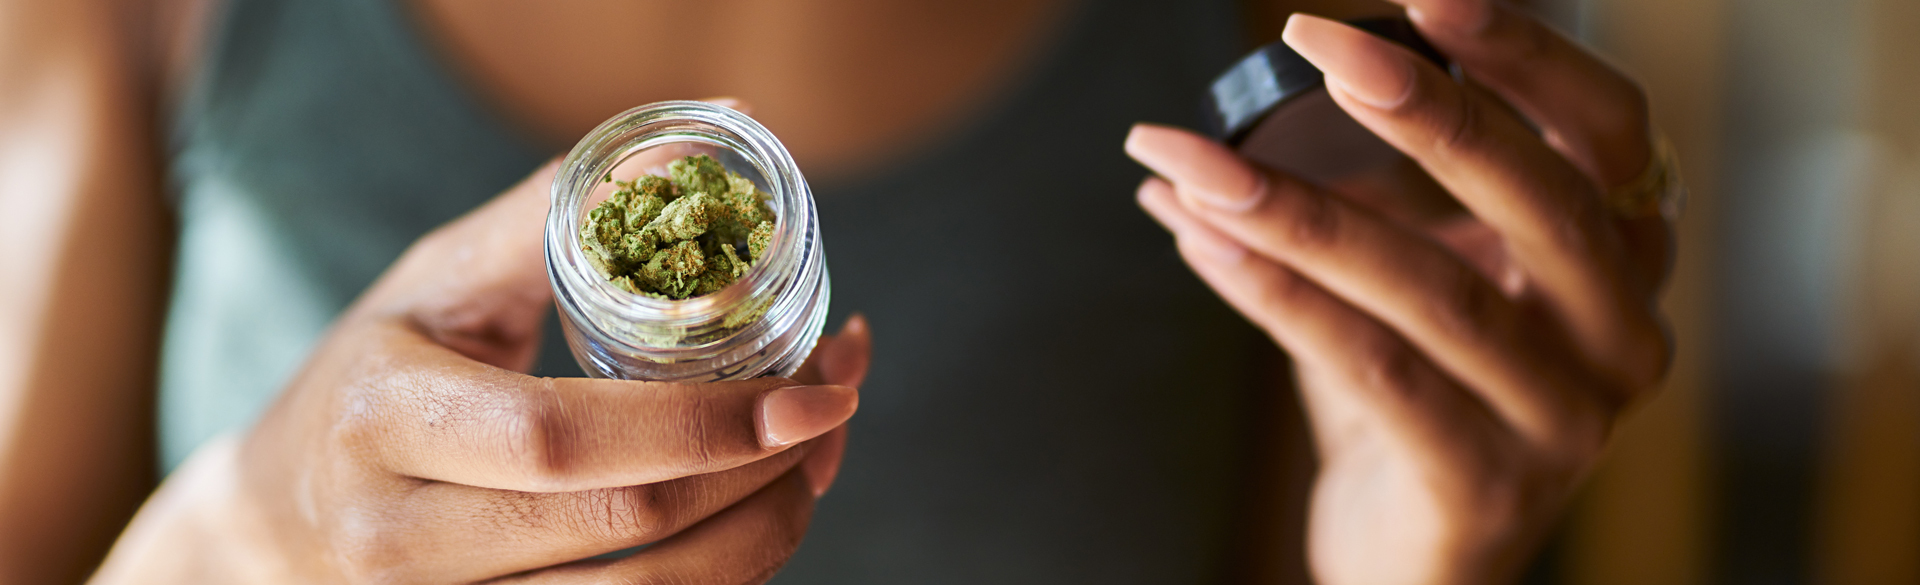 Woman holds a small jar of cannabis flower in one hand with lid in other hand